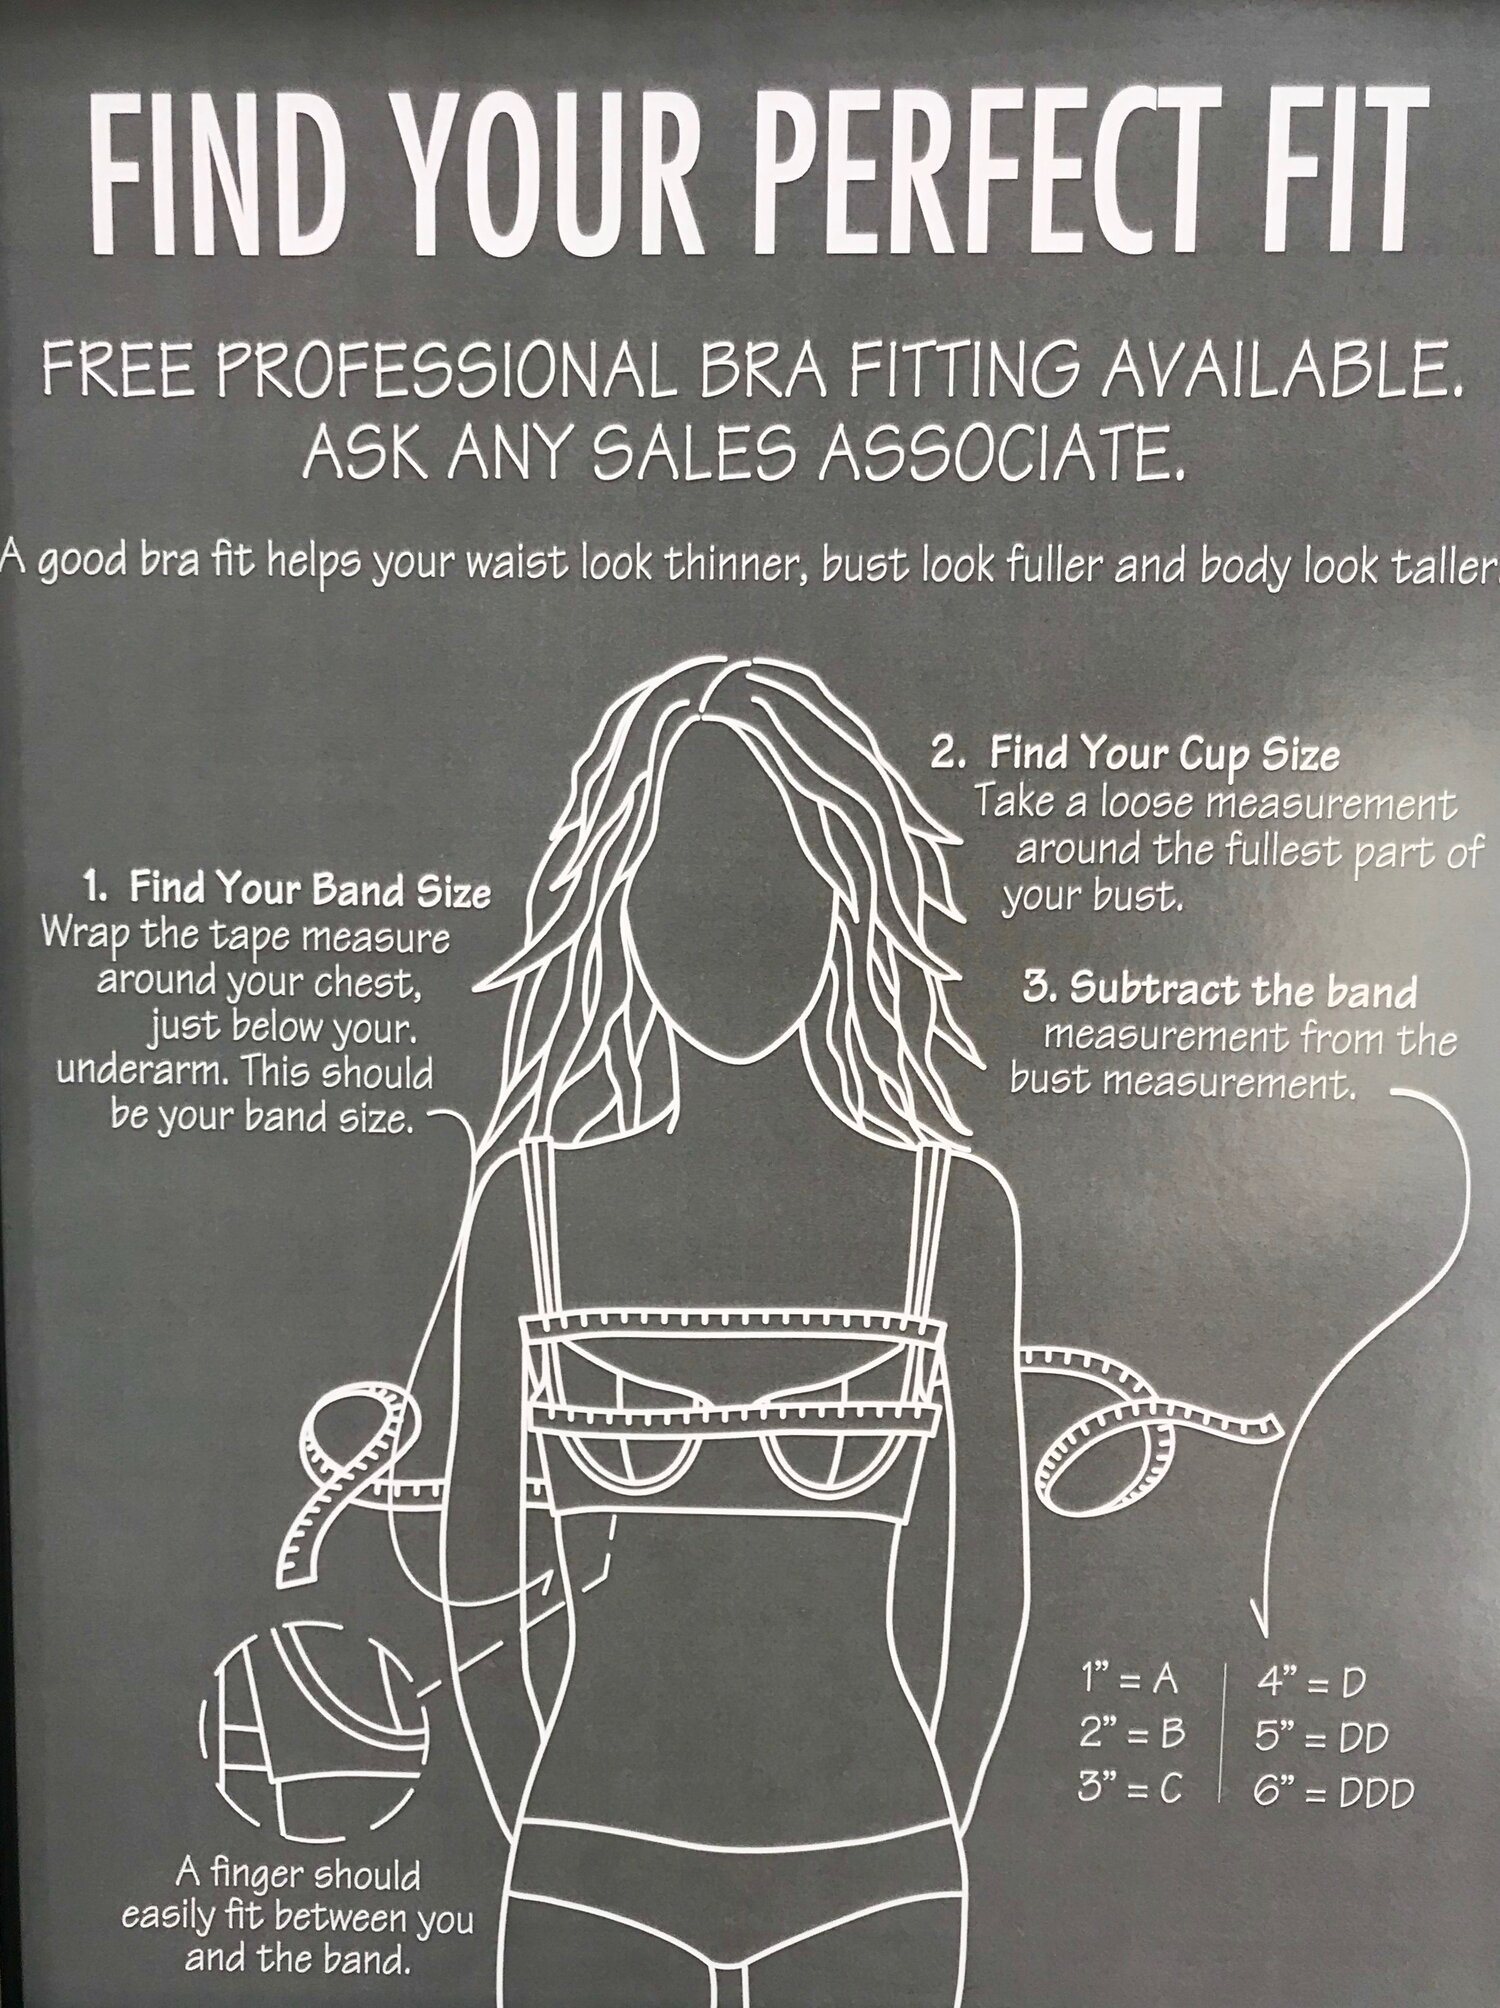 To Find the Perfect Bra, You Need Expert Support —